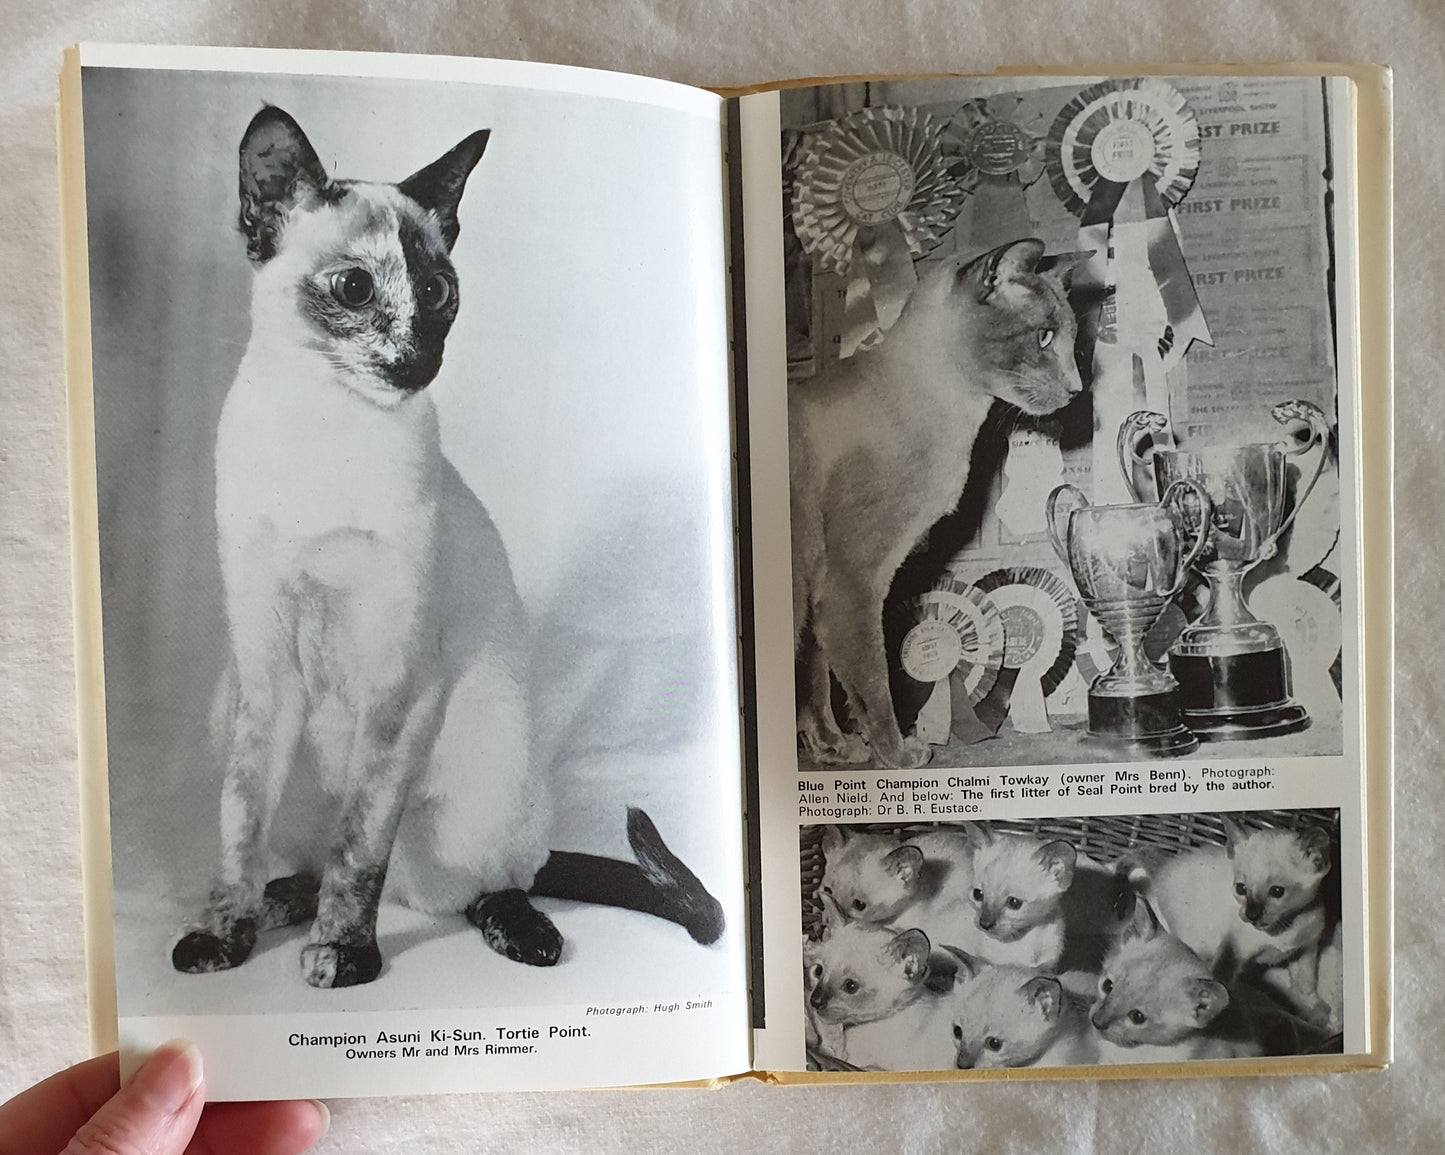 A Hundred Years of Siamese Cats by May Eustace